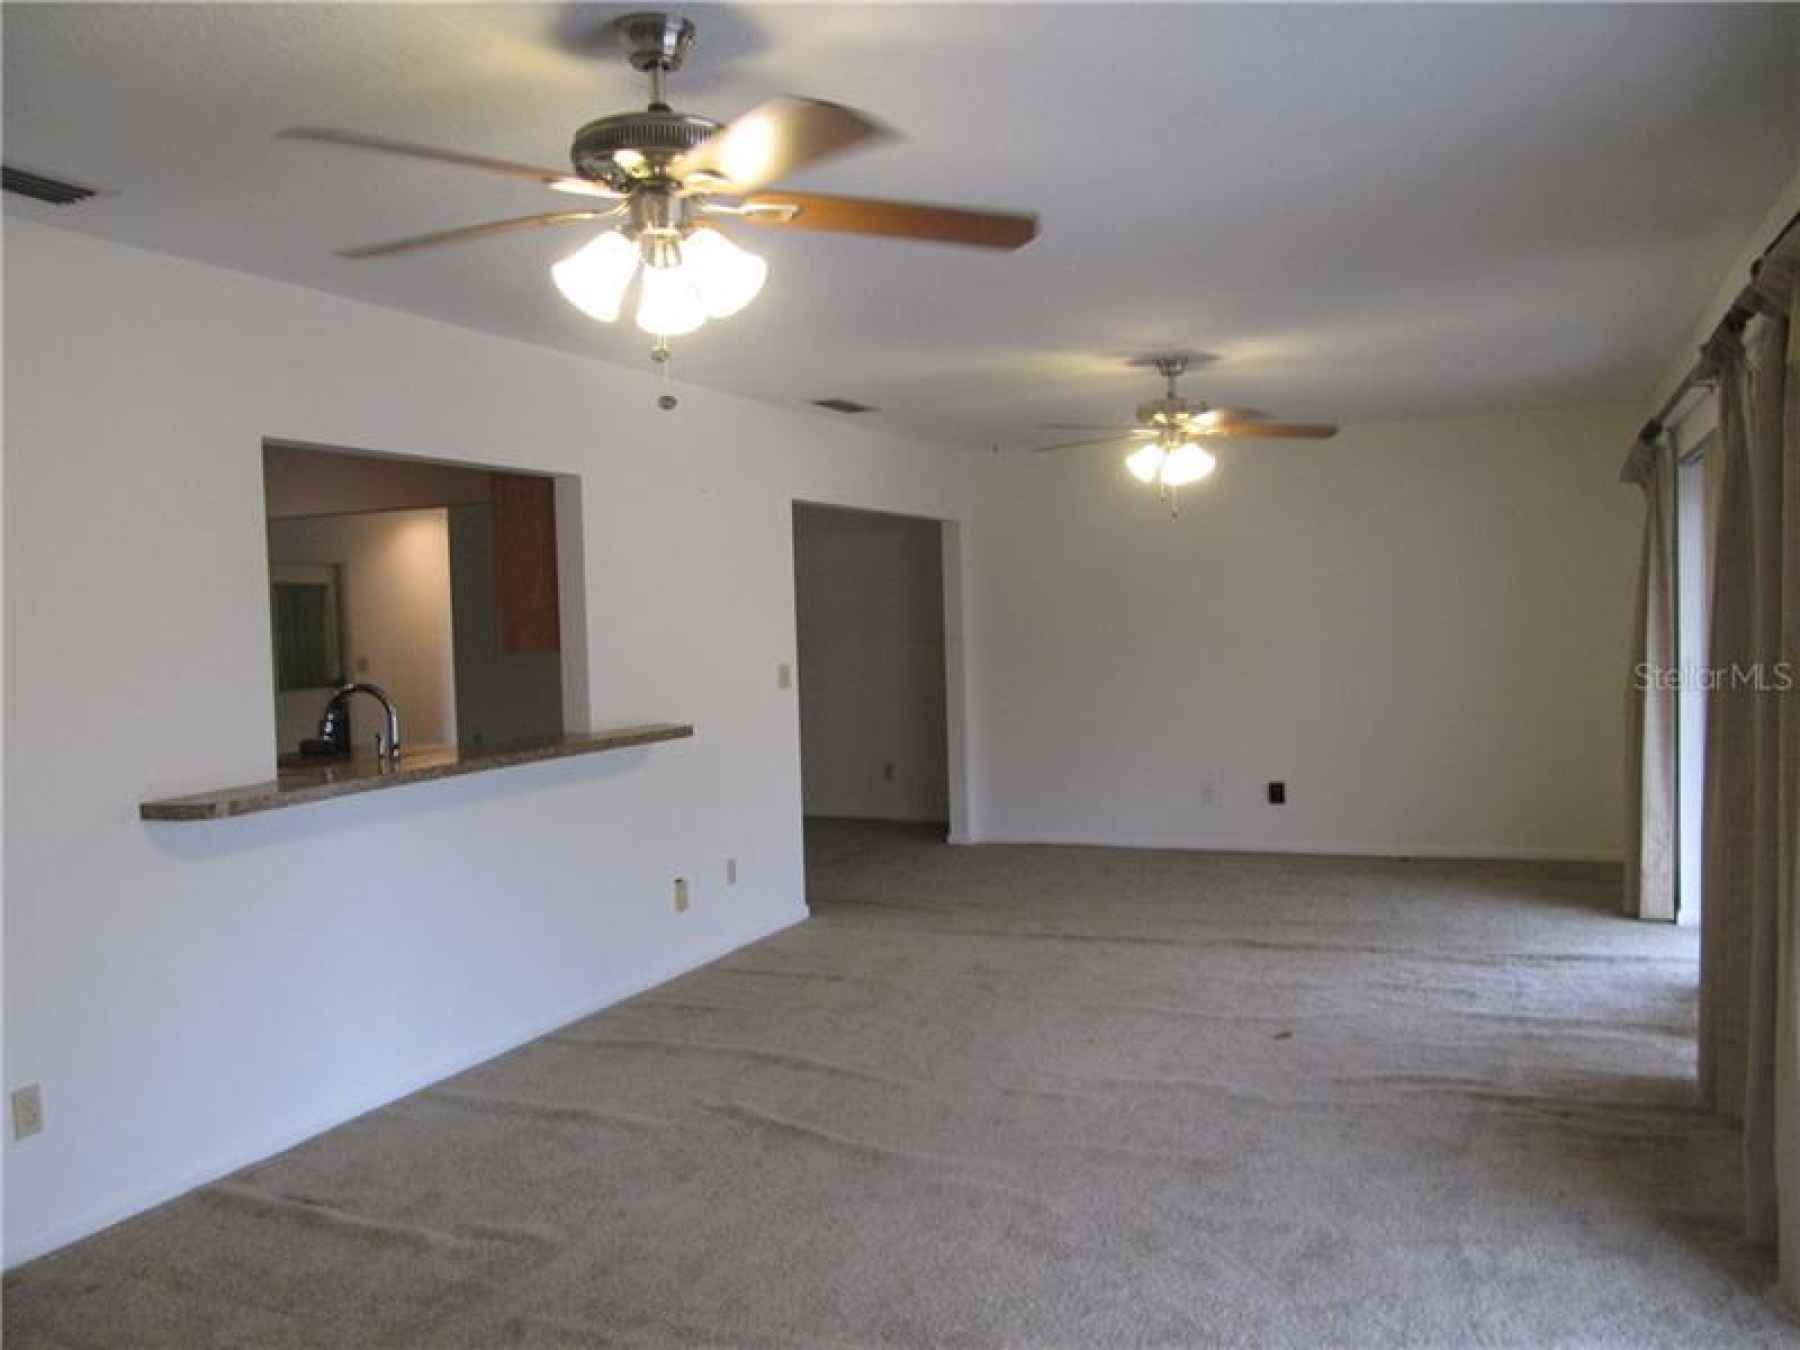 Great Room with pass through window to kitchen